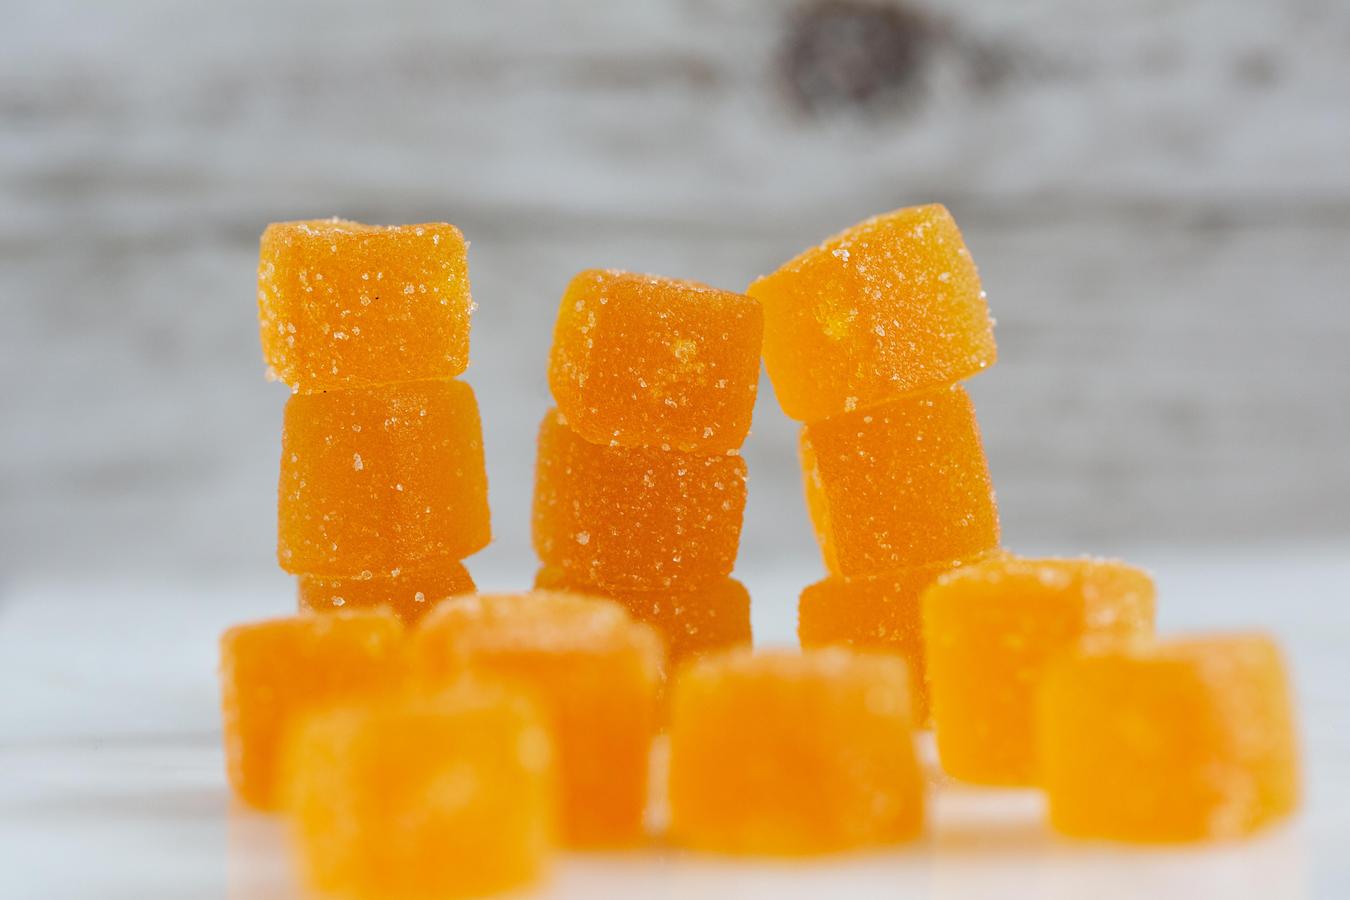 a pile of orange gummy candies cannabis infused oil cannabis tinctures fruit juice homemade edibles infused gummies potent weed gummies cannabis plant flavored jello